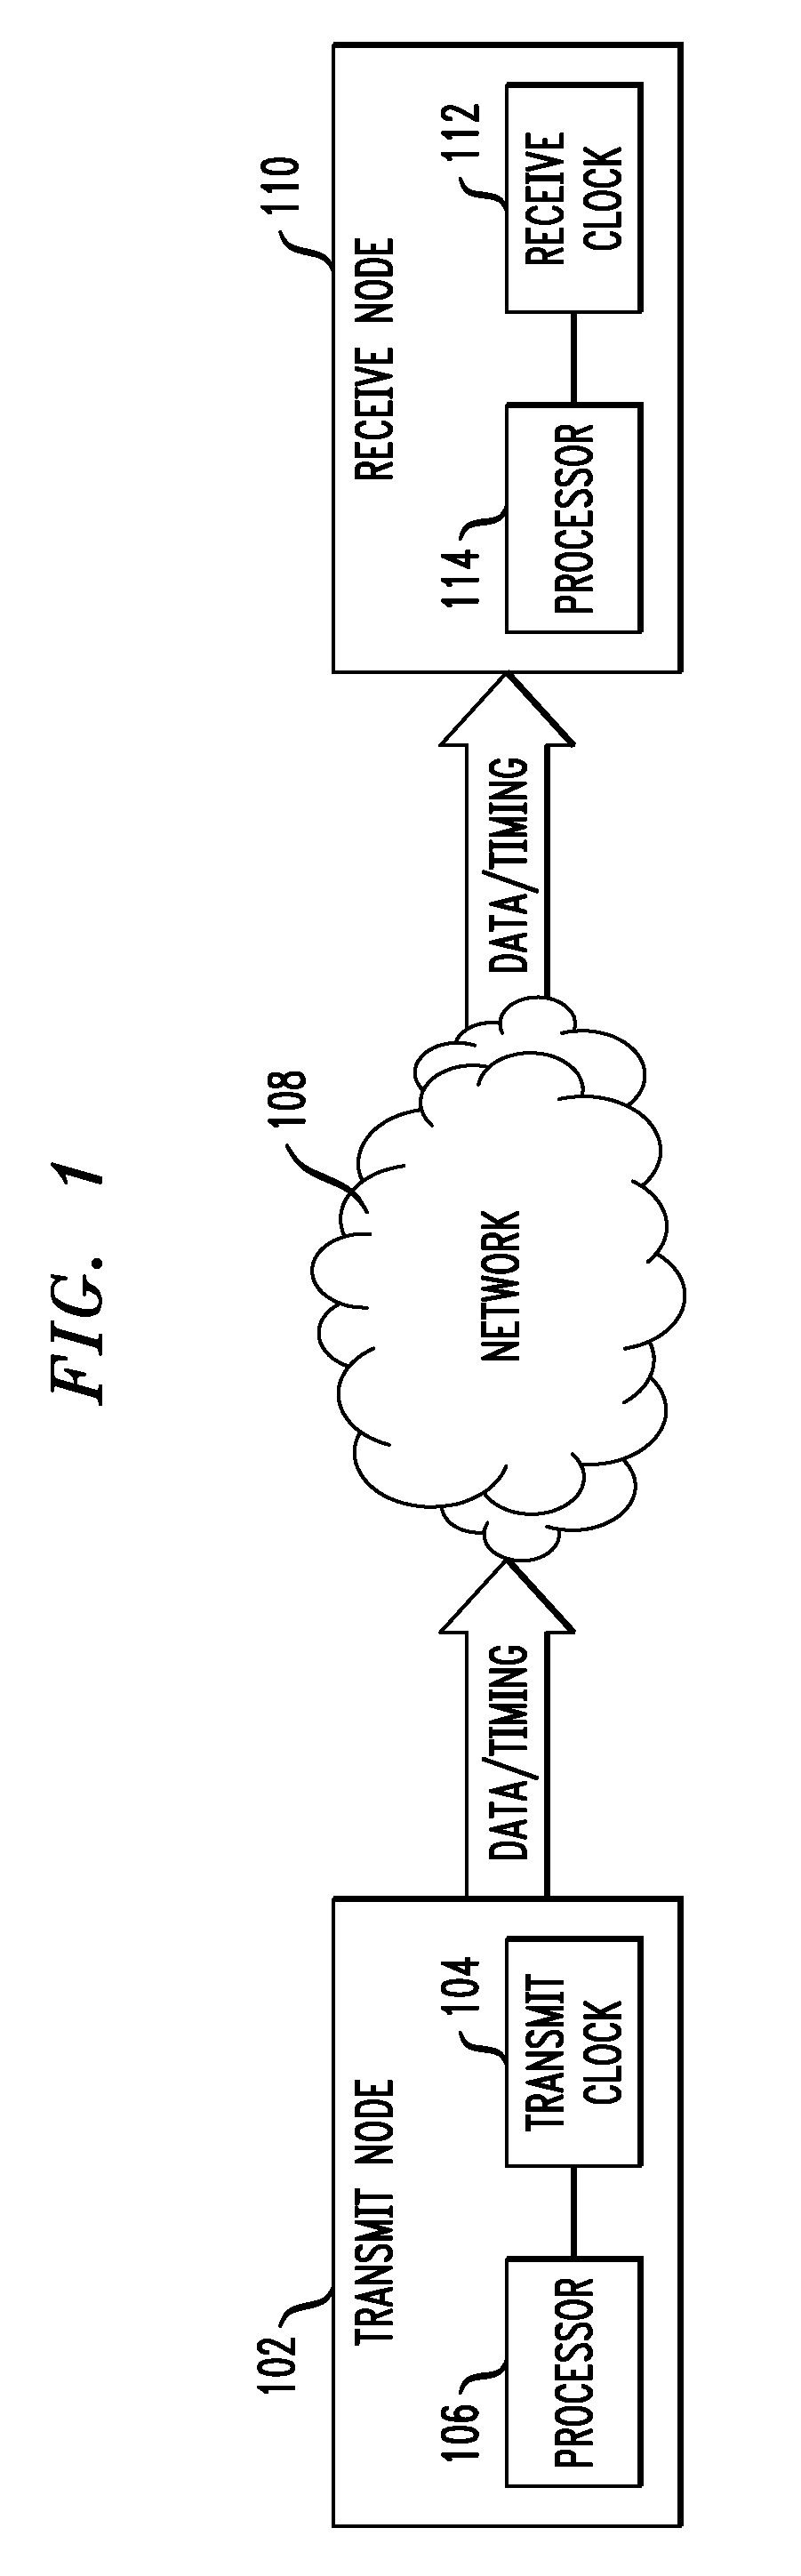 Methods and apparatus for unidirectional timing message transport over packet networks